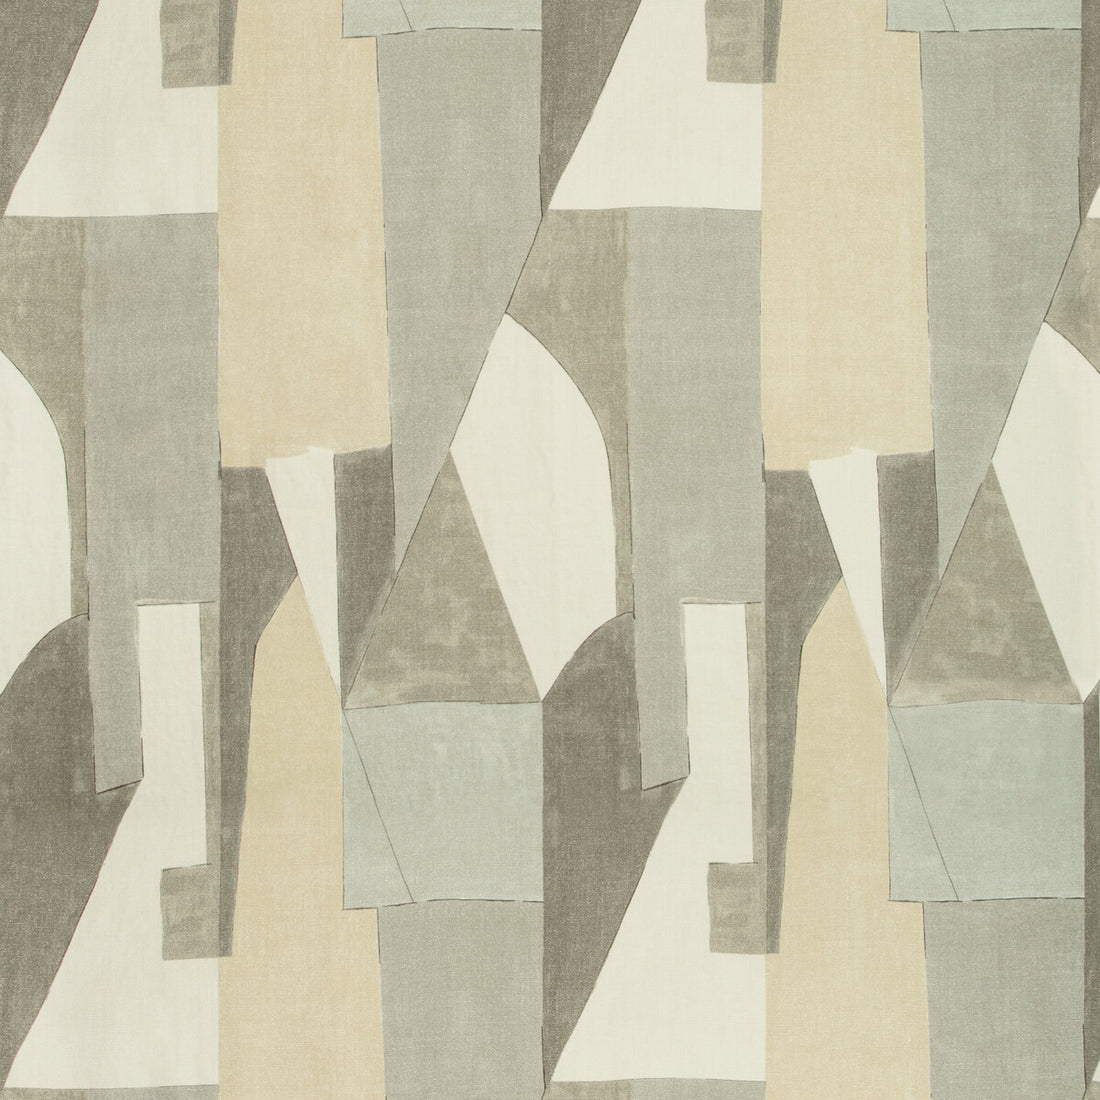 District fabric in alabaster color - pattern GWF-3752.116.0 - by Lee Jofa Modern in the Kelly Wearstler V collection